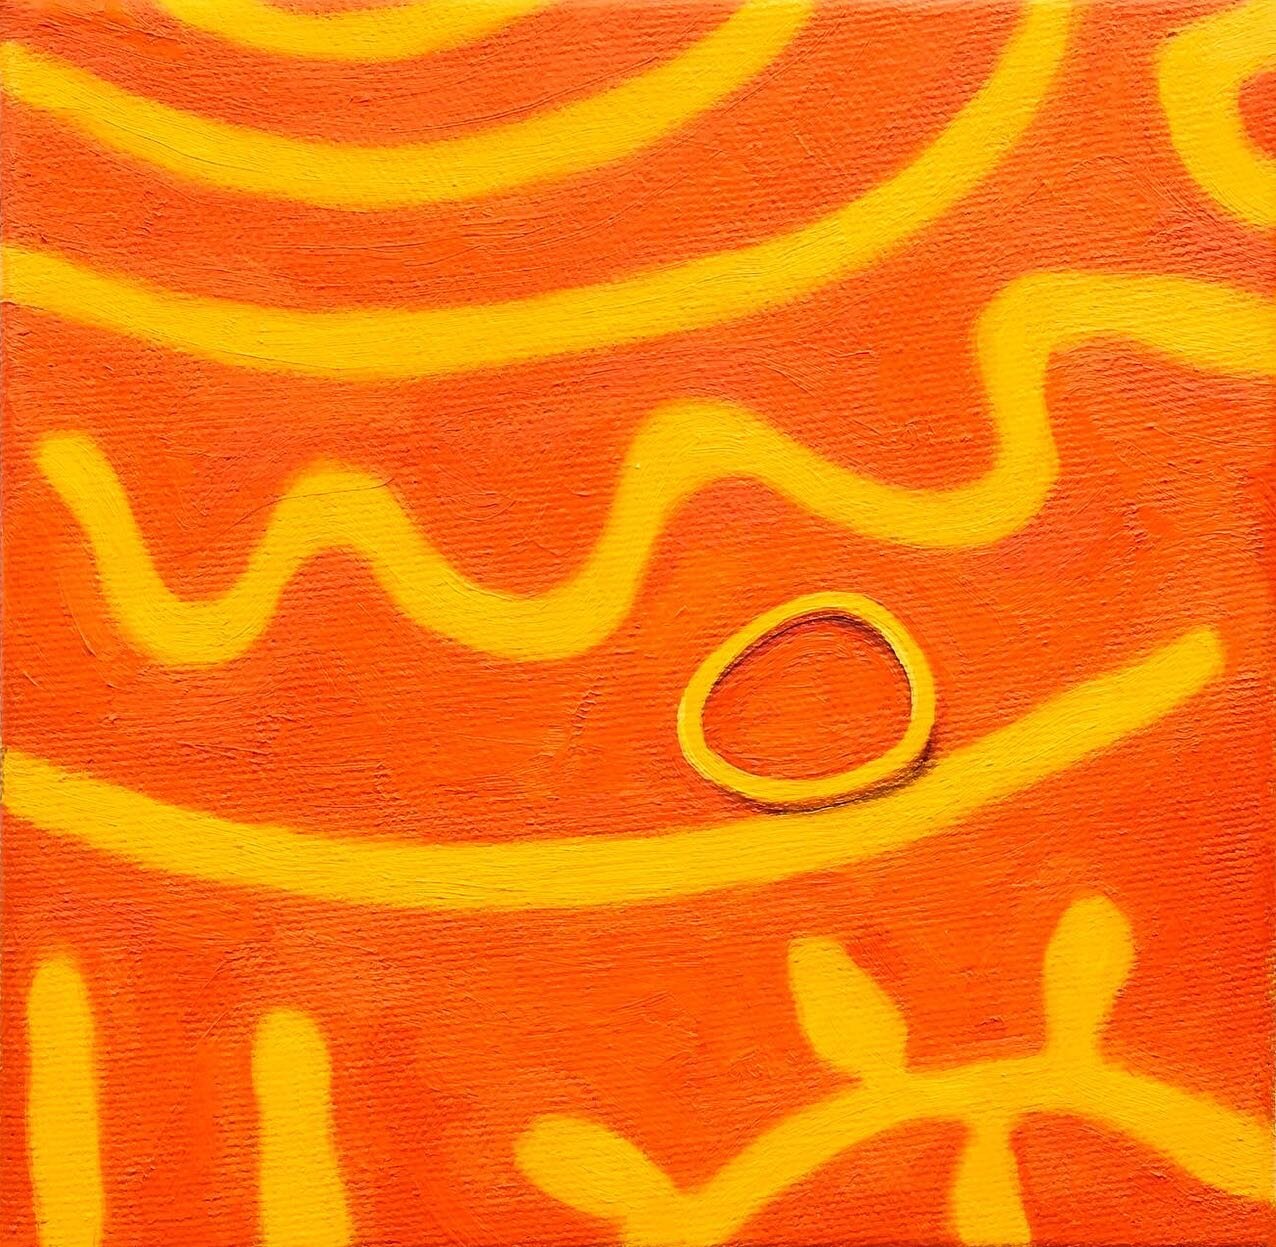 Catching those rays - soaking up the heat until you&rsquo;re glowing with warmth 💛
🧡
&lsquo;Sunbathing&rsquo; is one of a small painting series &lsquo;Camouflage&rsquo; - about being absorbed into an environment. Rubber bands are portrayed on diffe